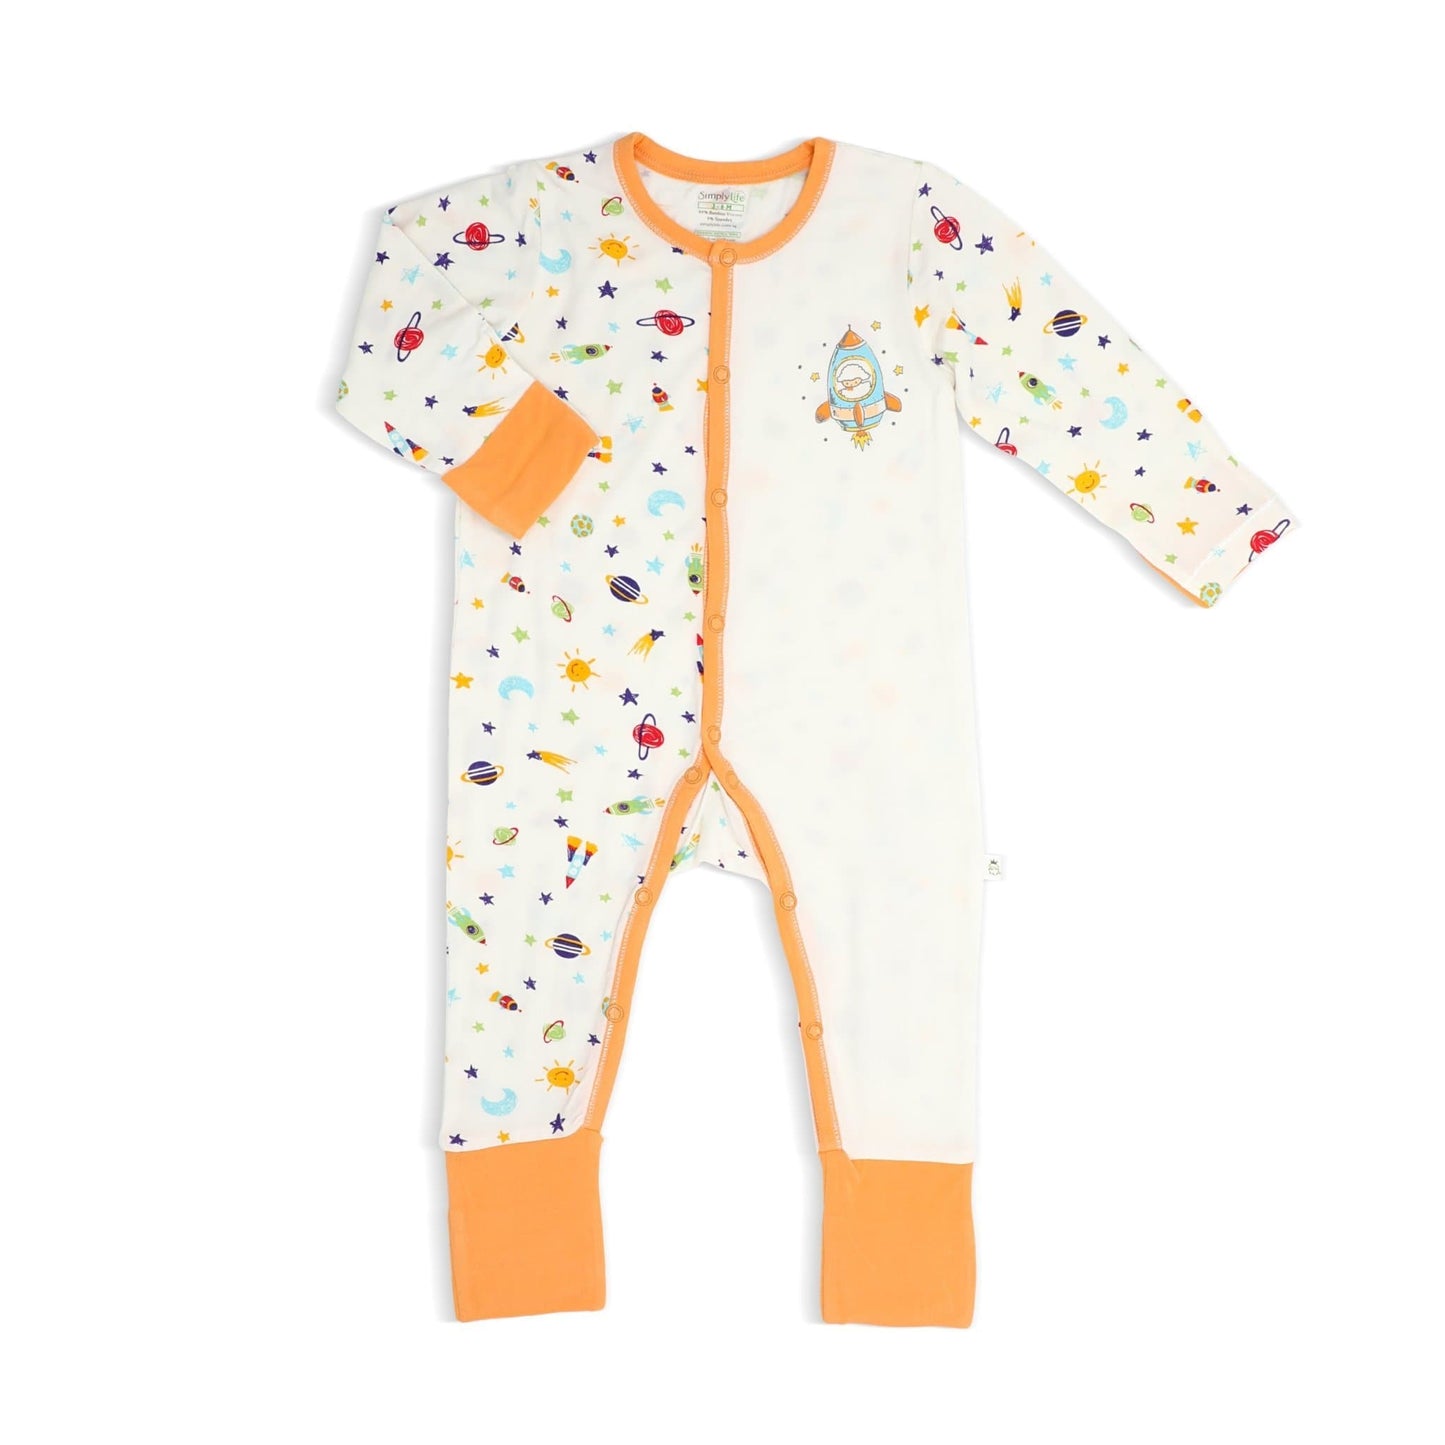 Spaceships (Orange)- Long-sleeved Button Sleepsuit with Folded Mittens & Footie (Spot Print) by simplylifebaby